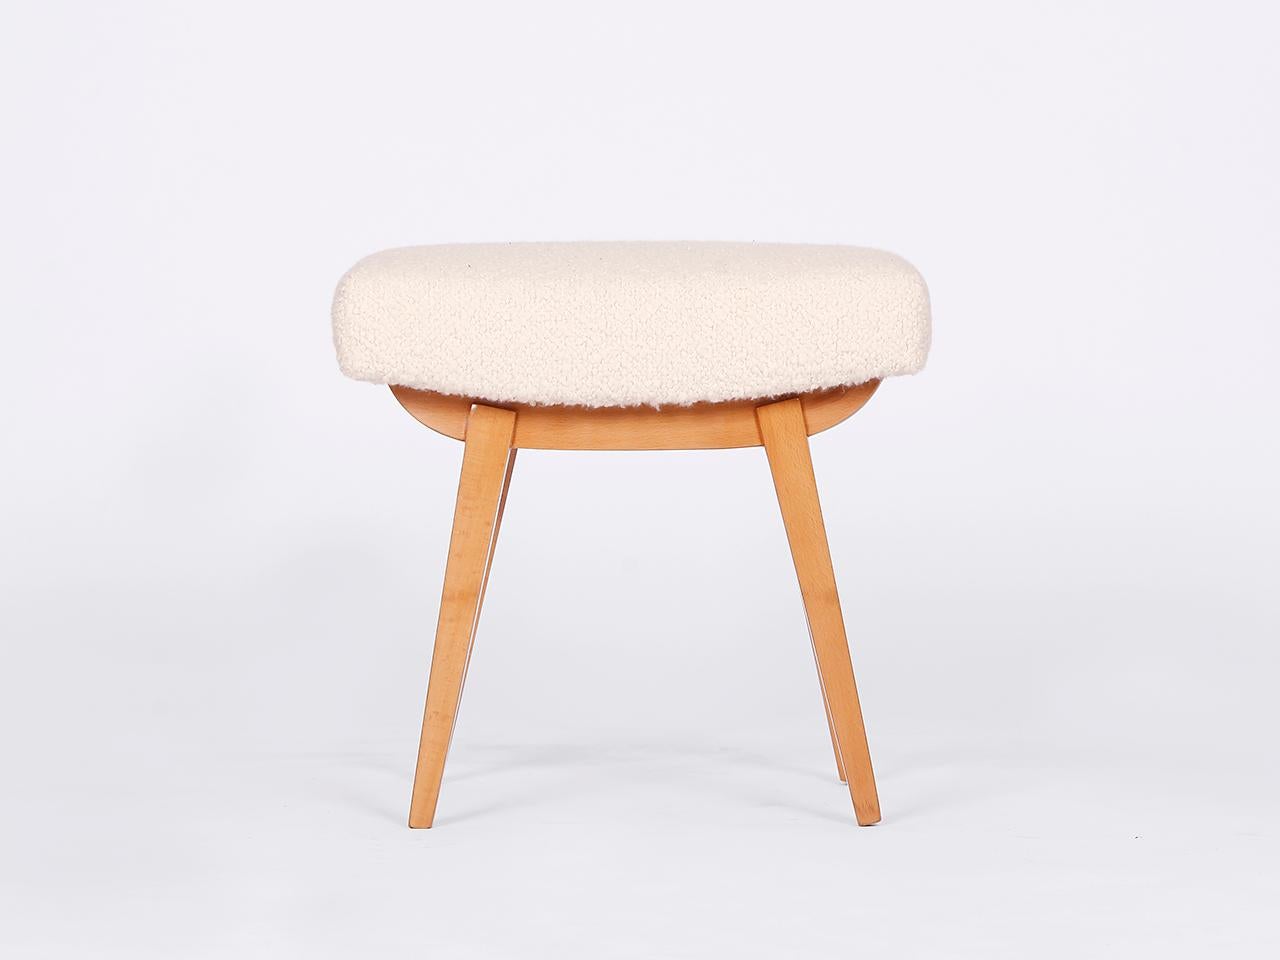 This mid-century stool footstool was made in the 1960s in former Czechoslovakia. The upholstery consists of a coconut fiber core, covered with a wonderful bouclé fabric made of soft wool and alpaca. Completely restored.